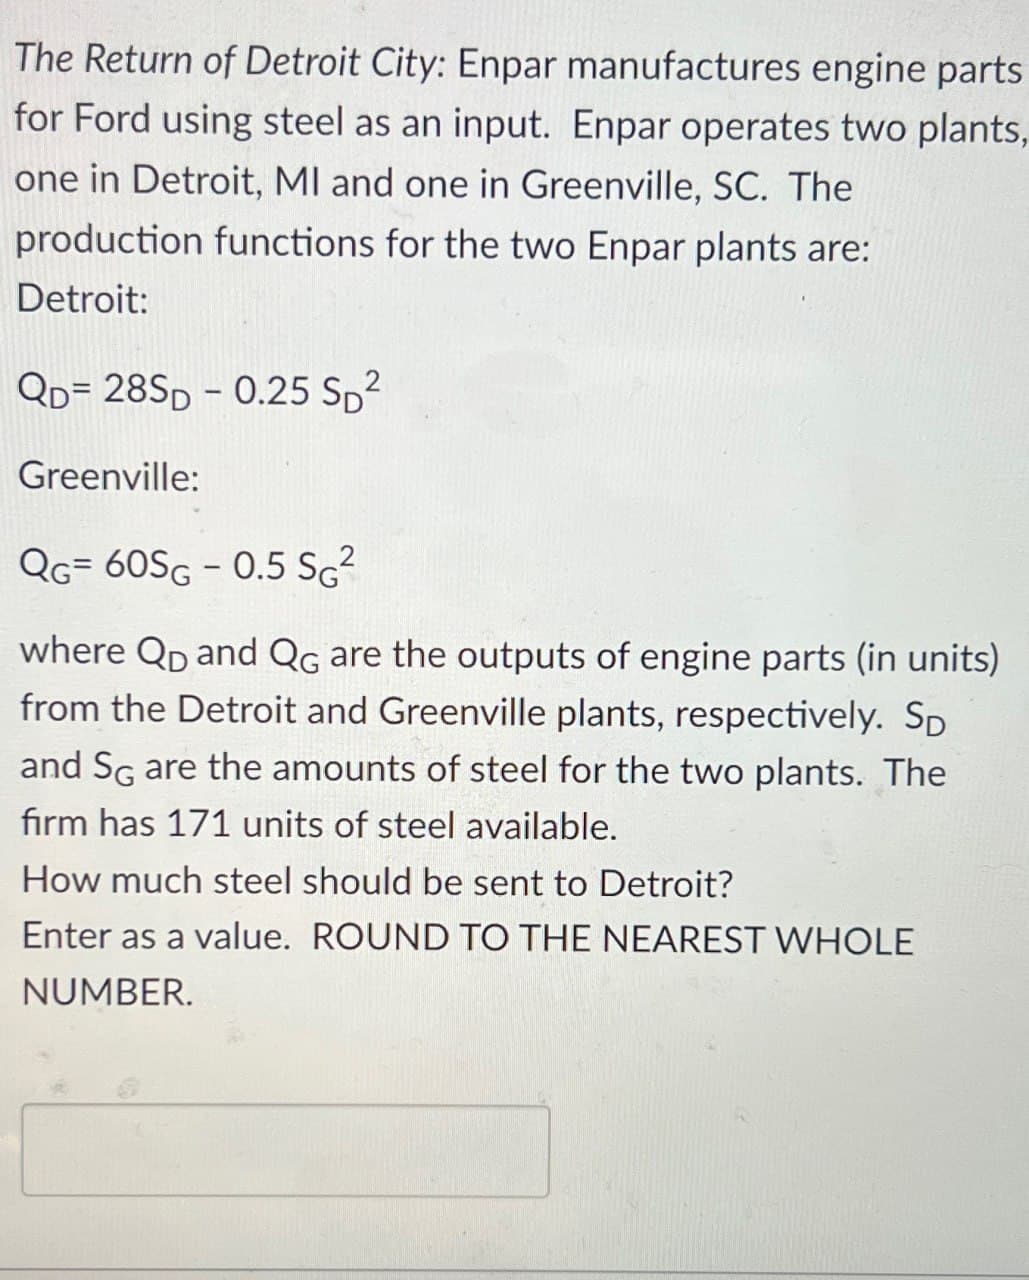 The Return of Detroit City: Enpar manufactures engine parts
for Ford using steel as an input. Enpar operates two plants,
one in Detroit, MI and one in Greenville, SC. The
production functions for the two Enpar plants are:
Detroit:
QD=28SD-0.25 SD2
Greenville:
QG= 60SG-0.5 SG²
where QD and QG are the outputs of engine parts (in units)
from the Detroit and Greenville plants, respectively. Sp
and SG are the amounts of steel for the two plants. The
firm has 171 units of steel available.
How much steel should be sent to Detroit?
Enter as a value. ROUND TO THE NEAREST WHOLE
NUMBER.